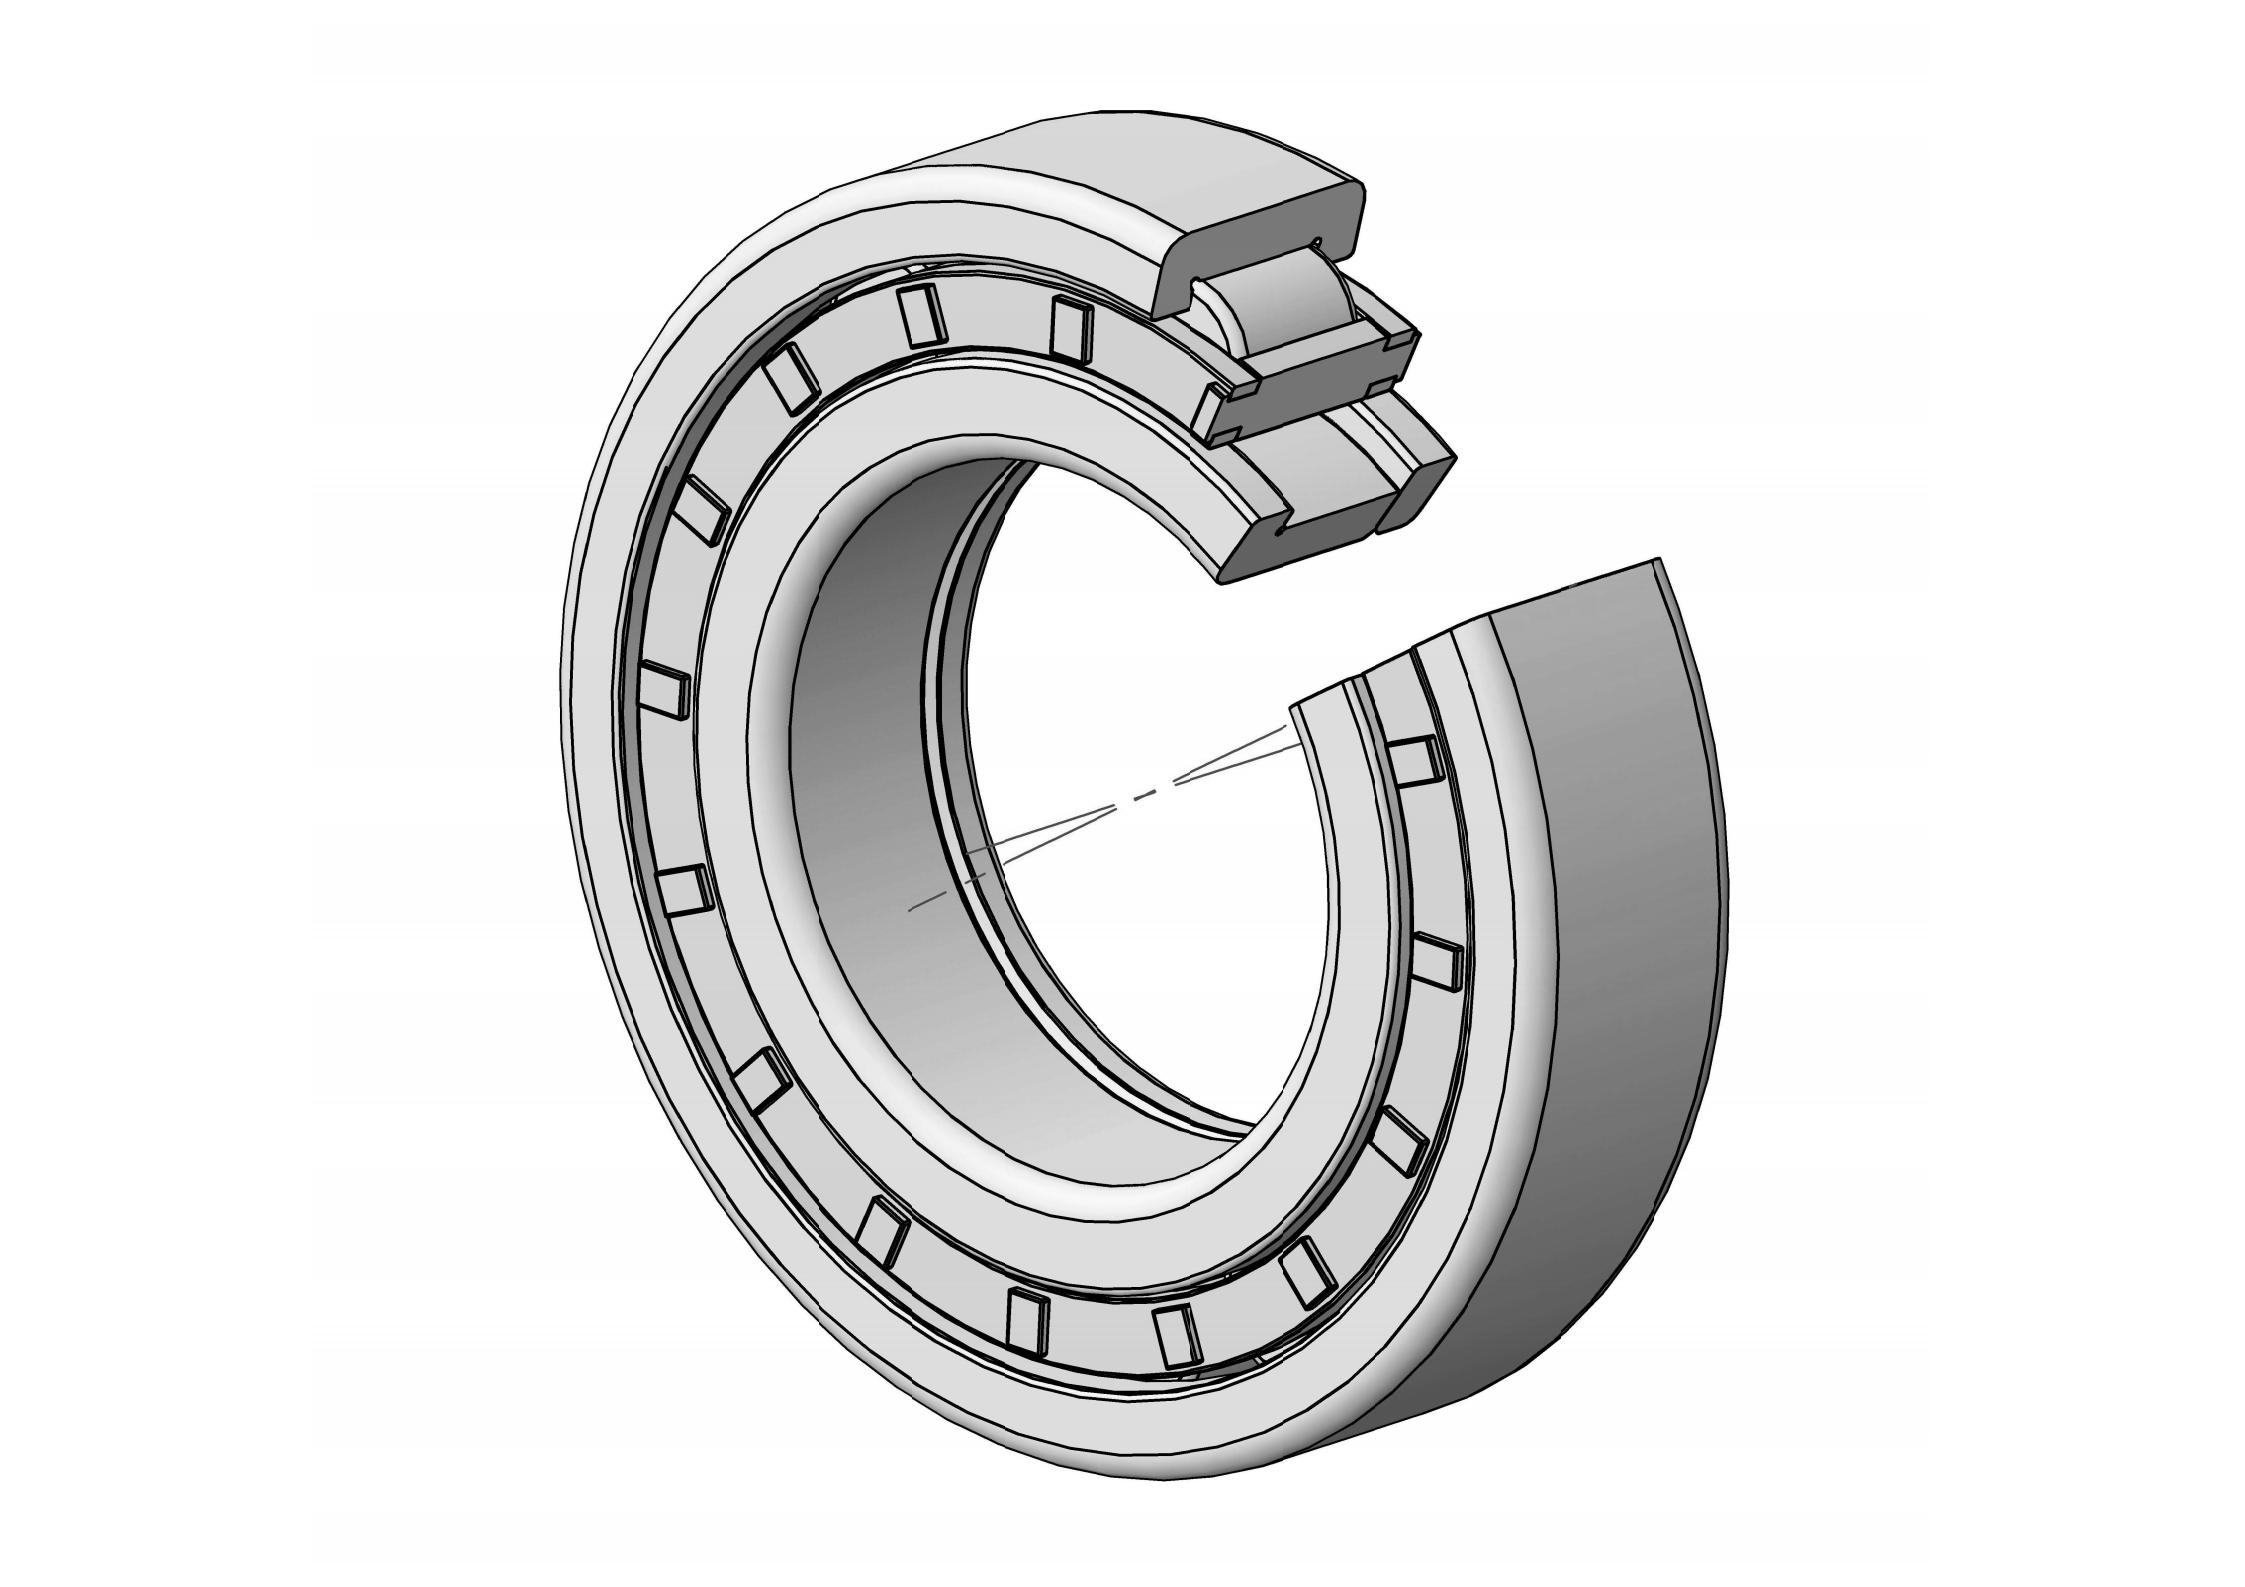 High quality and durable 62092rs bearing available now at competitive prices